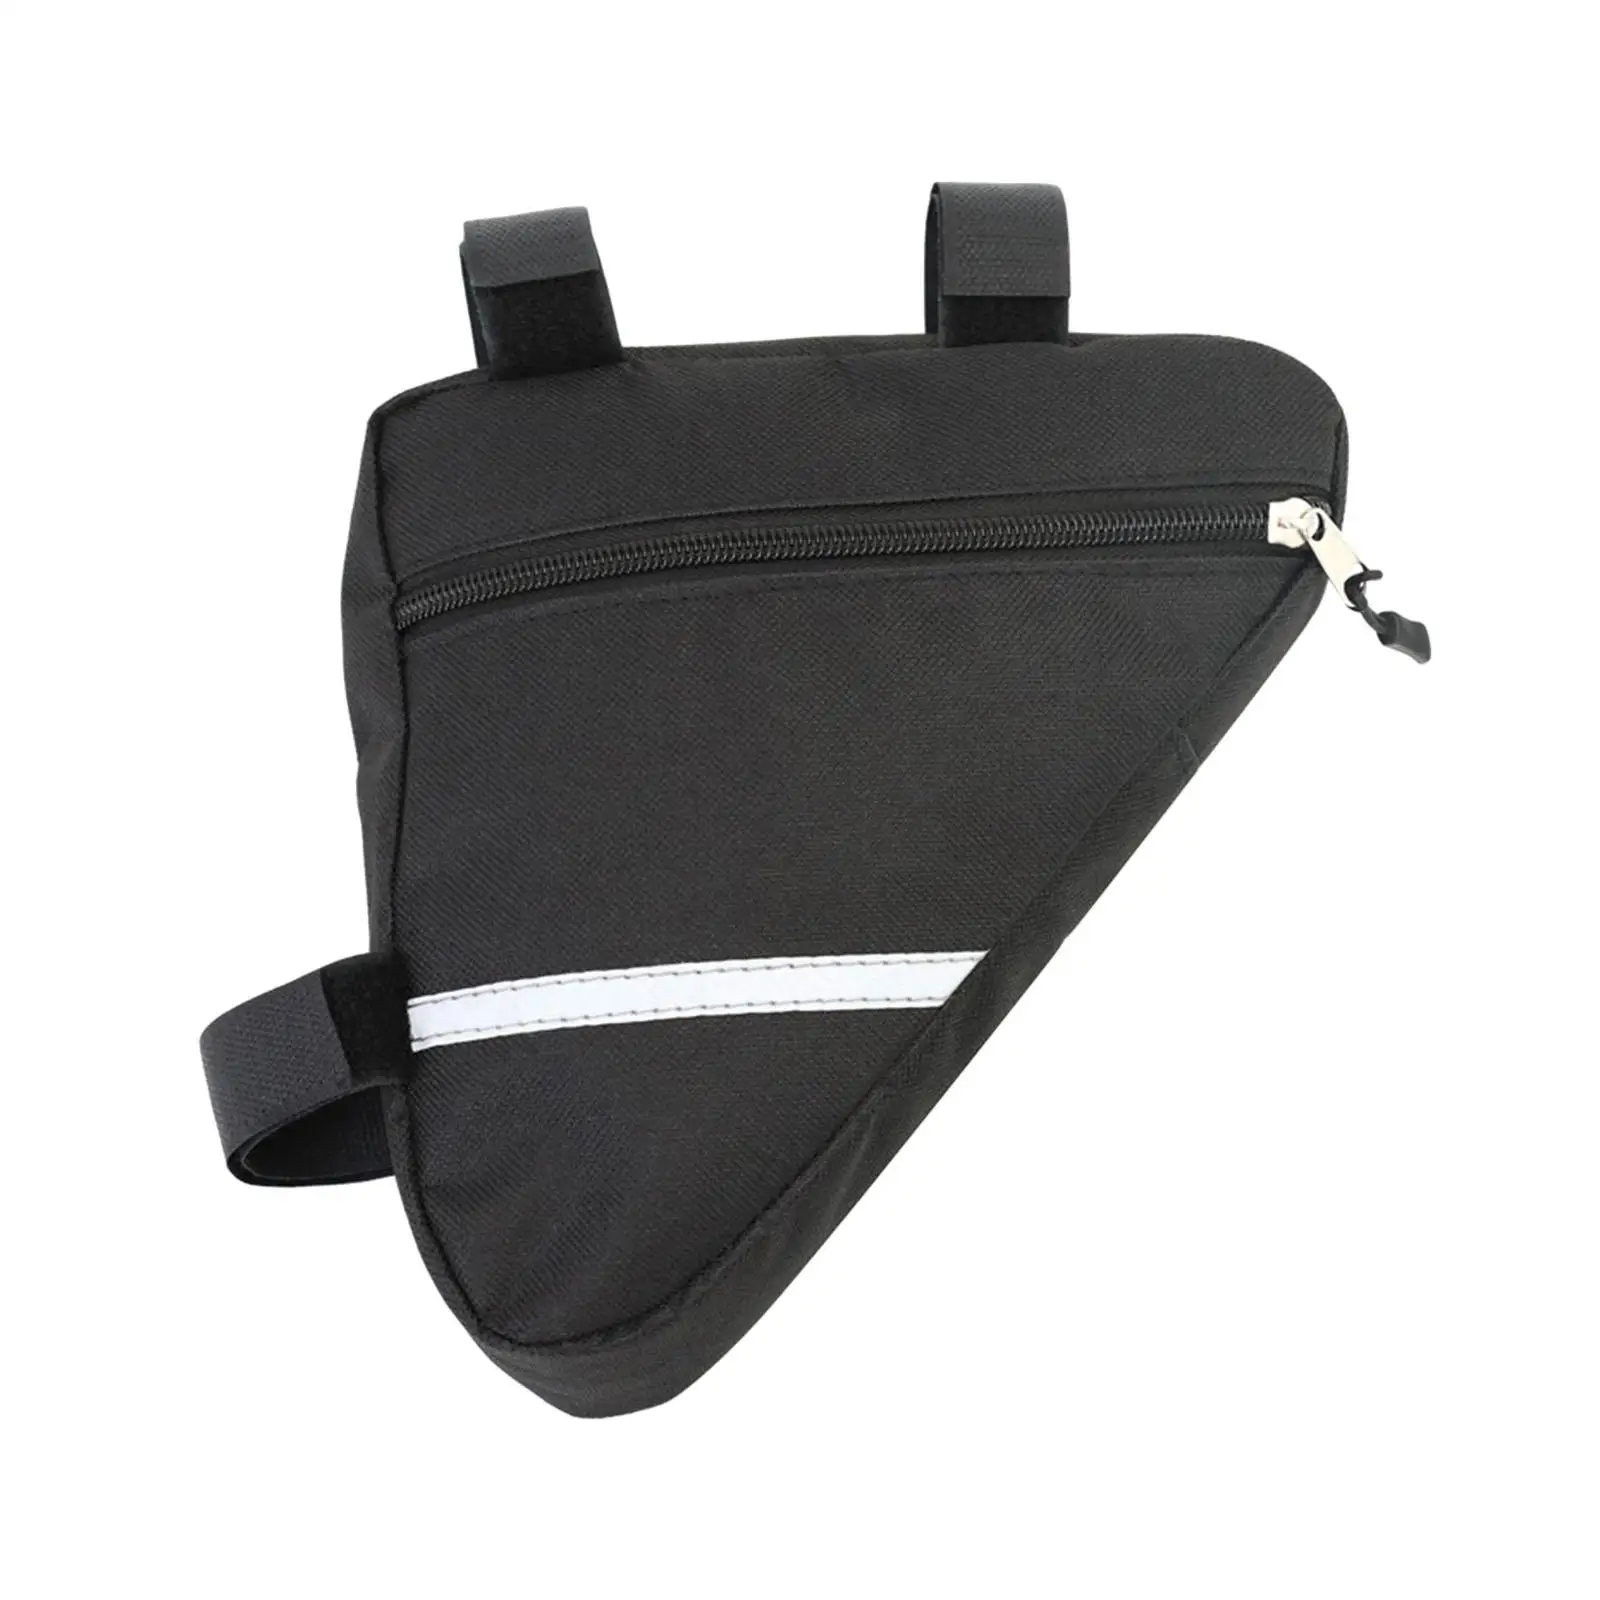 Waterproof Bike Frame Bag Cycling Bicycle Pouch Accessories Saddle Bag Storage Bag Tube Pouch for Outdoor Sports